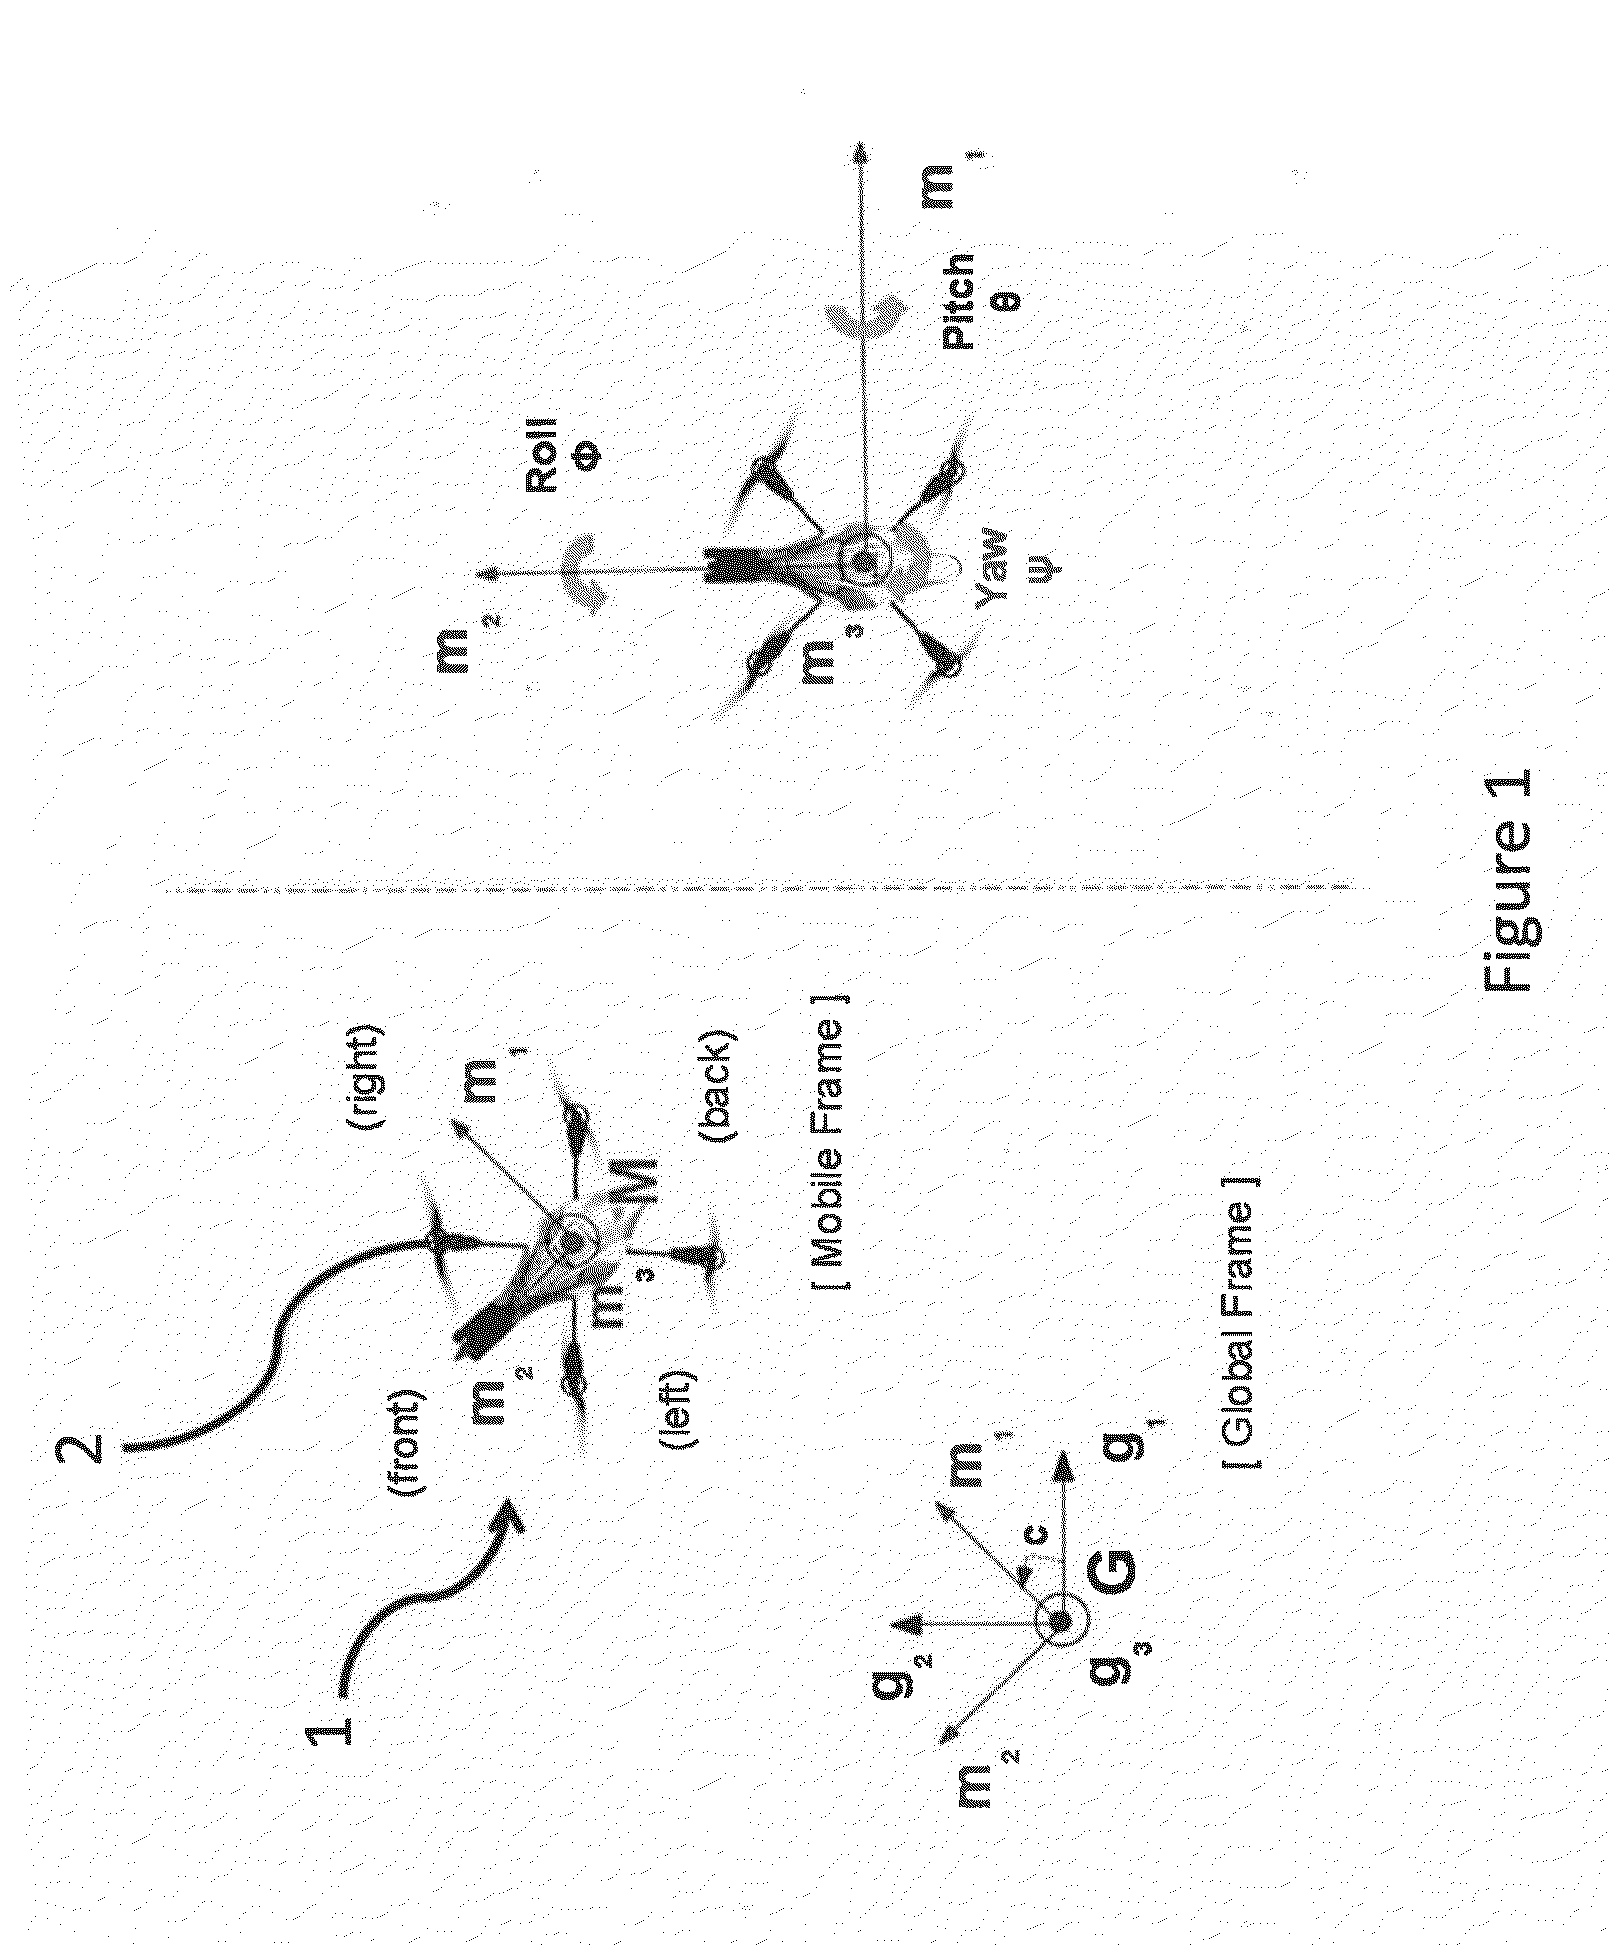 Method for controlling a path of a rotary-wing drone, a corresponding system, a rotary-wing drone implementing this system and the related uses of such a drone